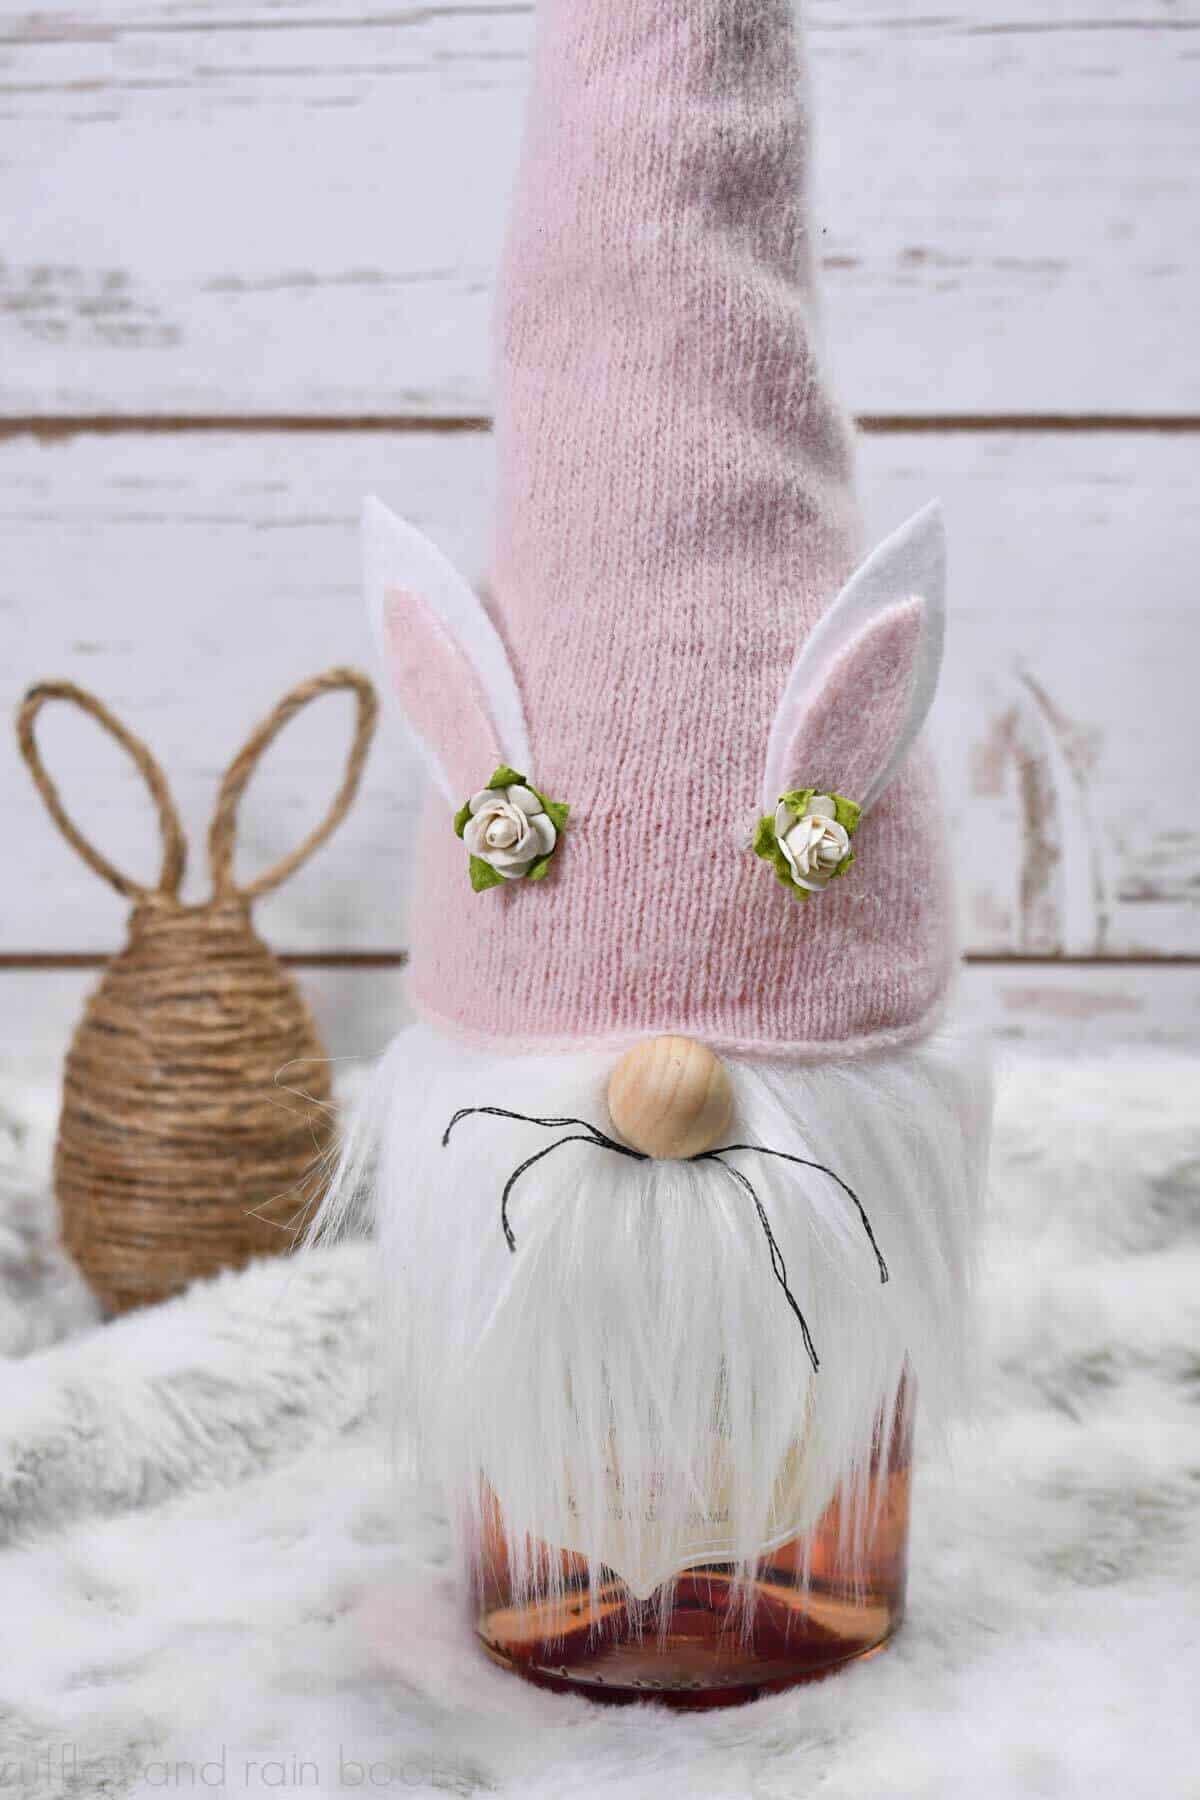 Vertical image of a pink hat Easter gnome bottle topper with ears, whiskers, and beard in front of a twine bunny egg on a fur table with wood slat background.